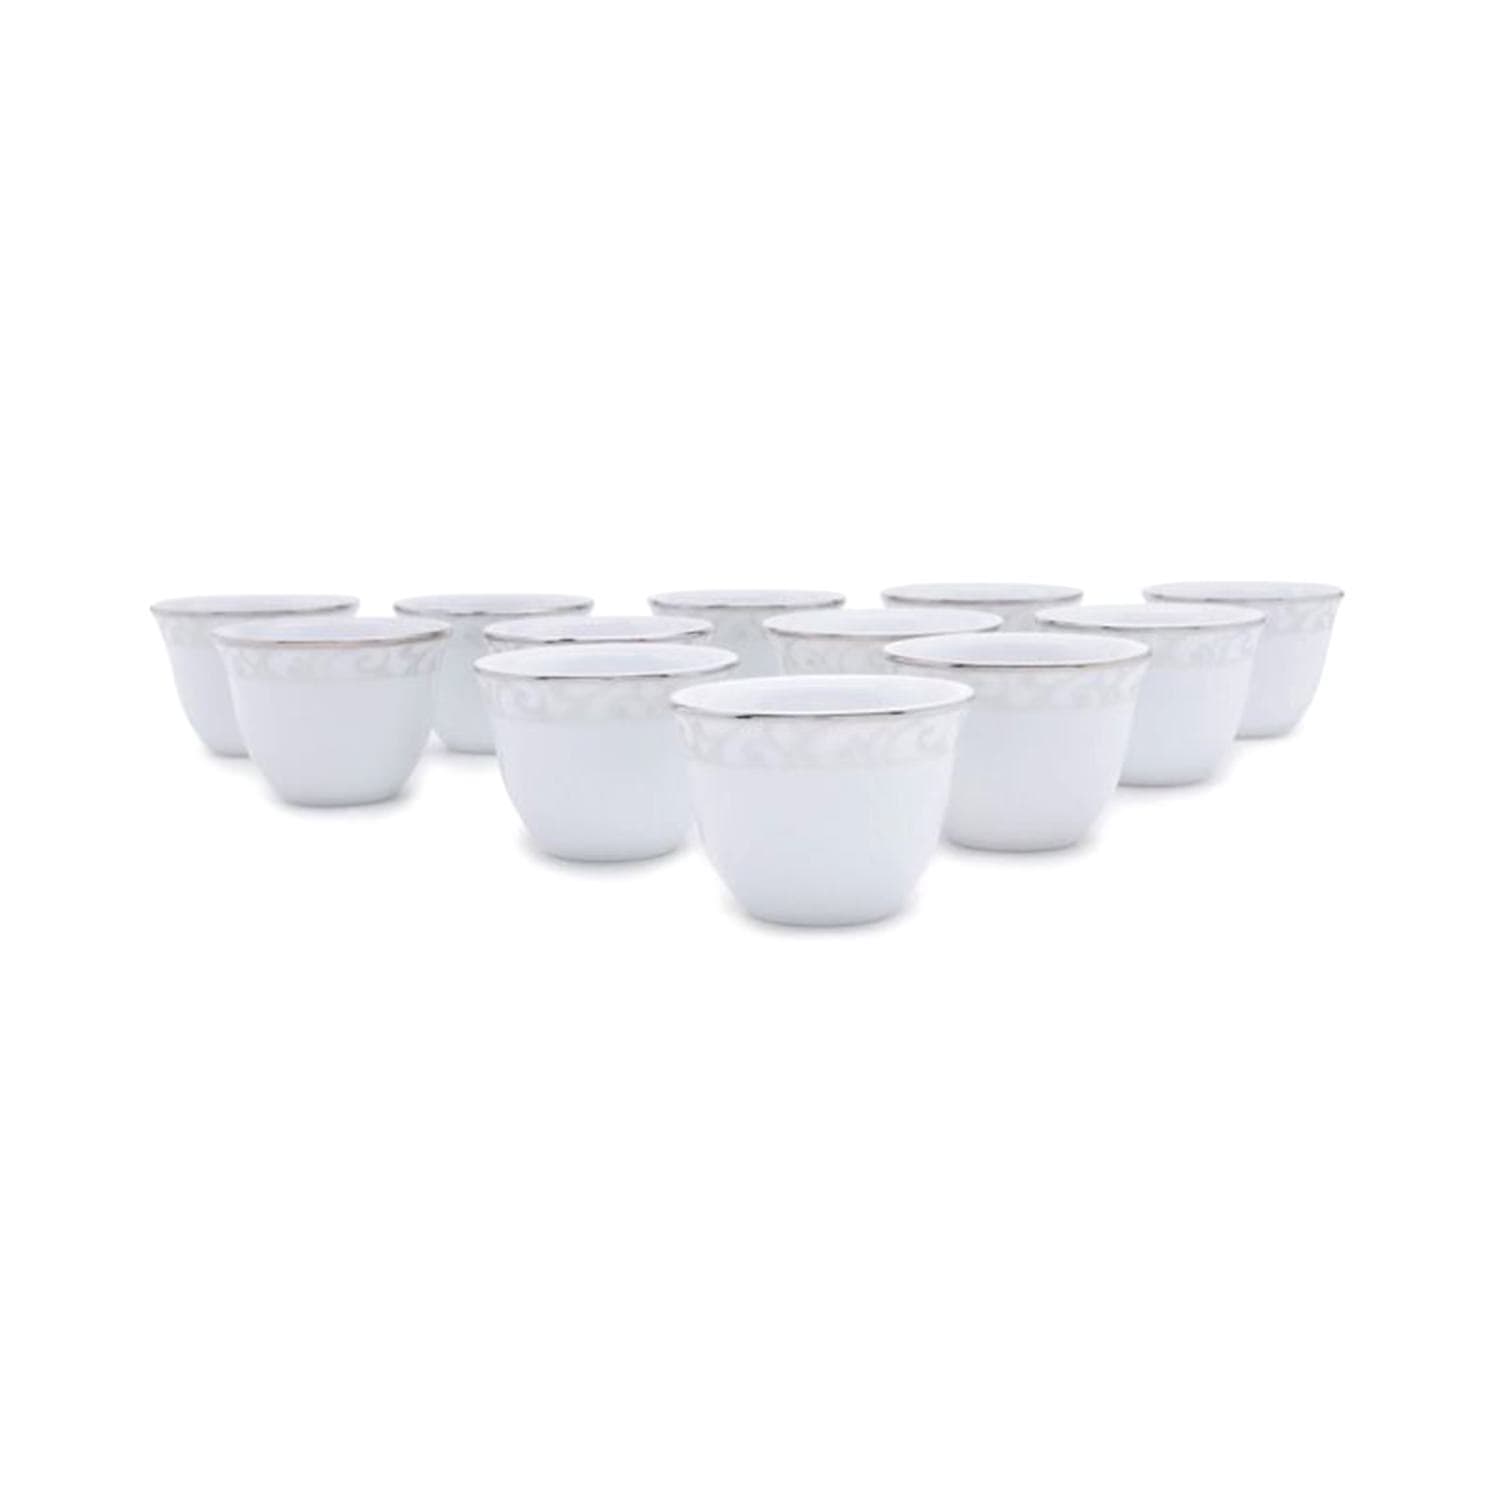 Dankotuwa Silver Mix Cawa Cups - White and Silver, Set of 12 - SILM-CC12 - Jashanmal Home